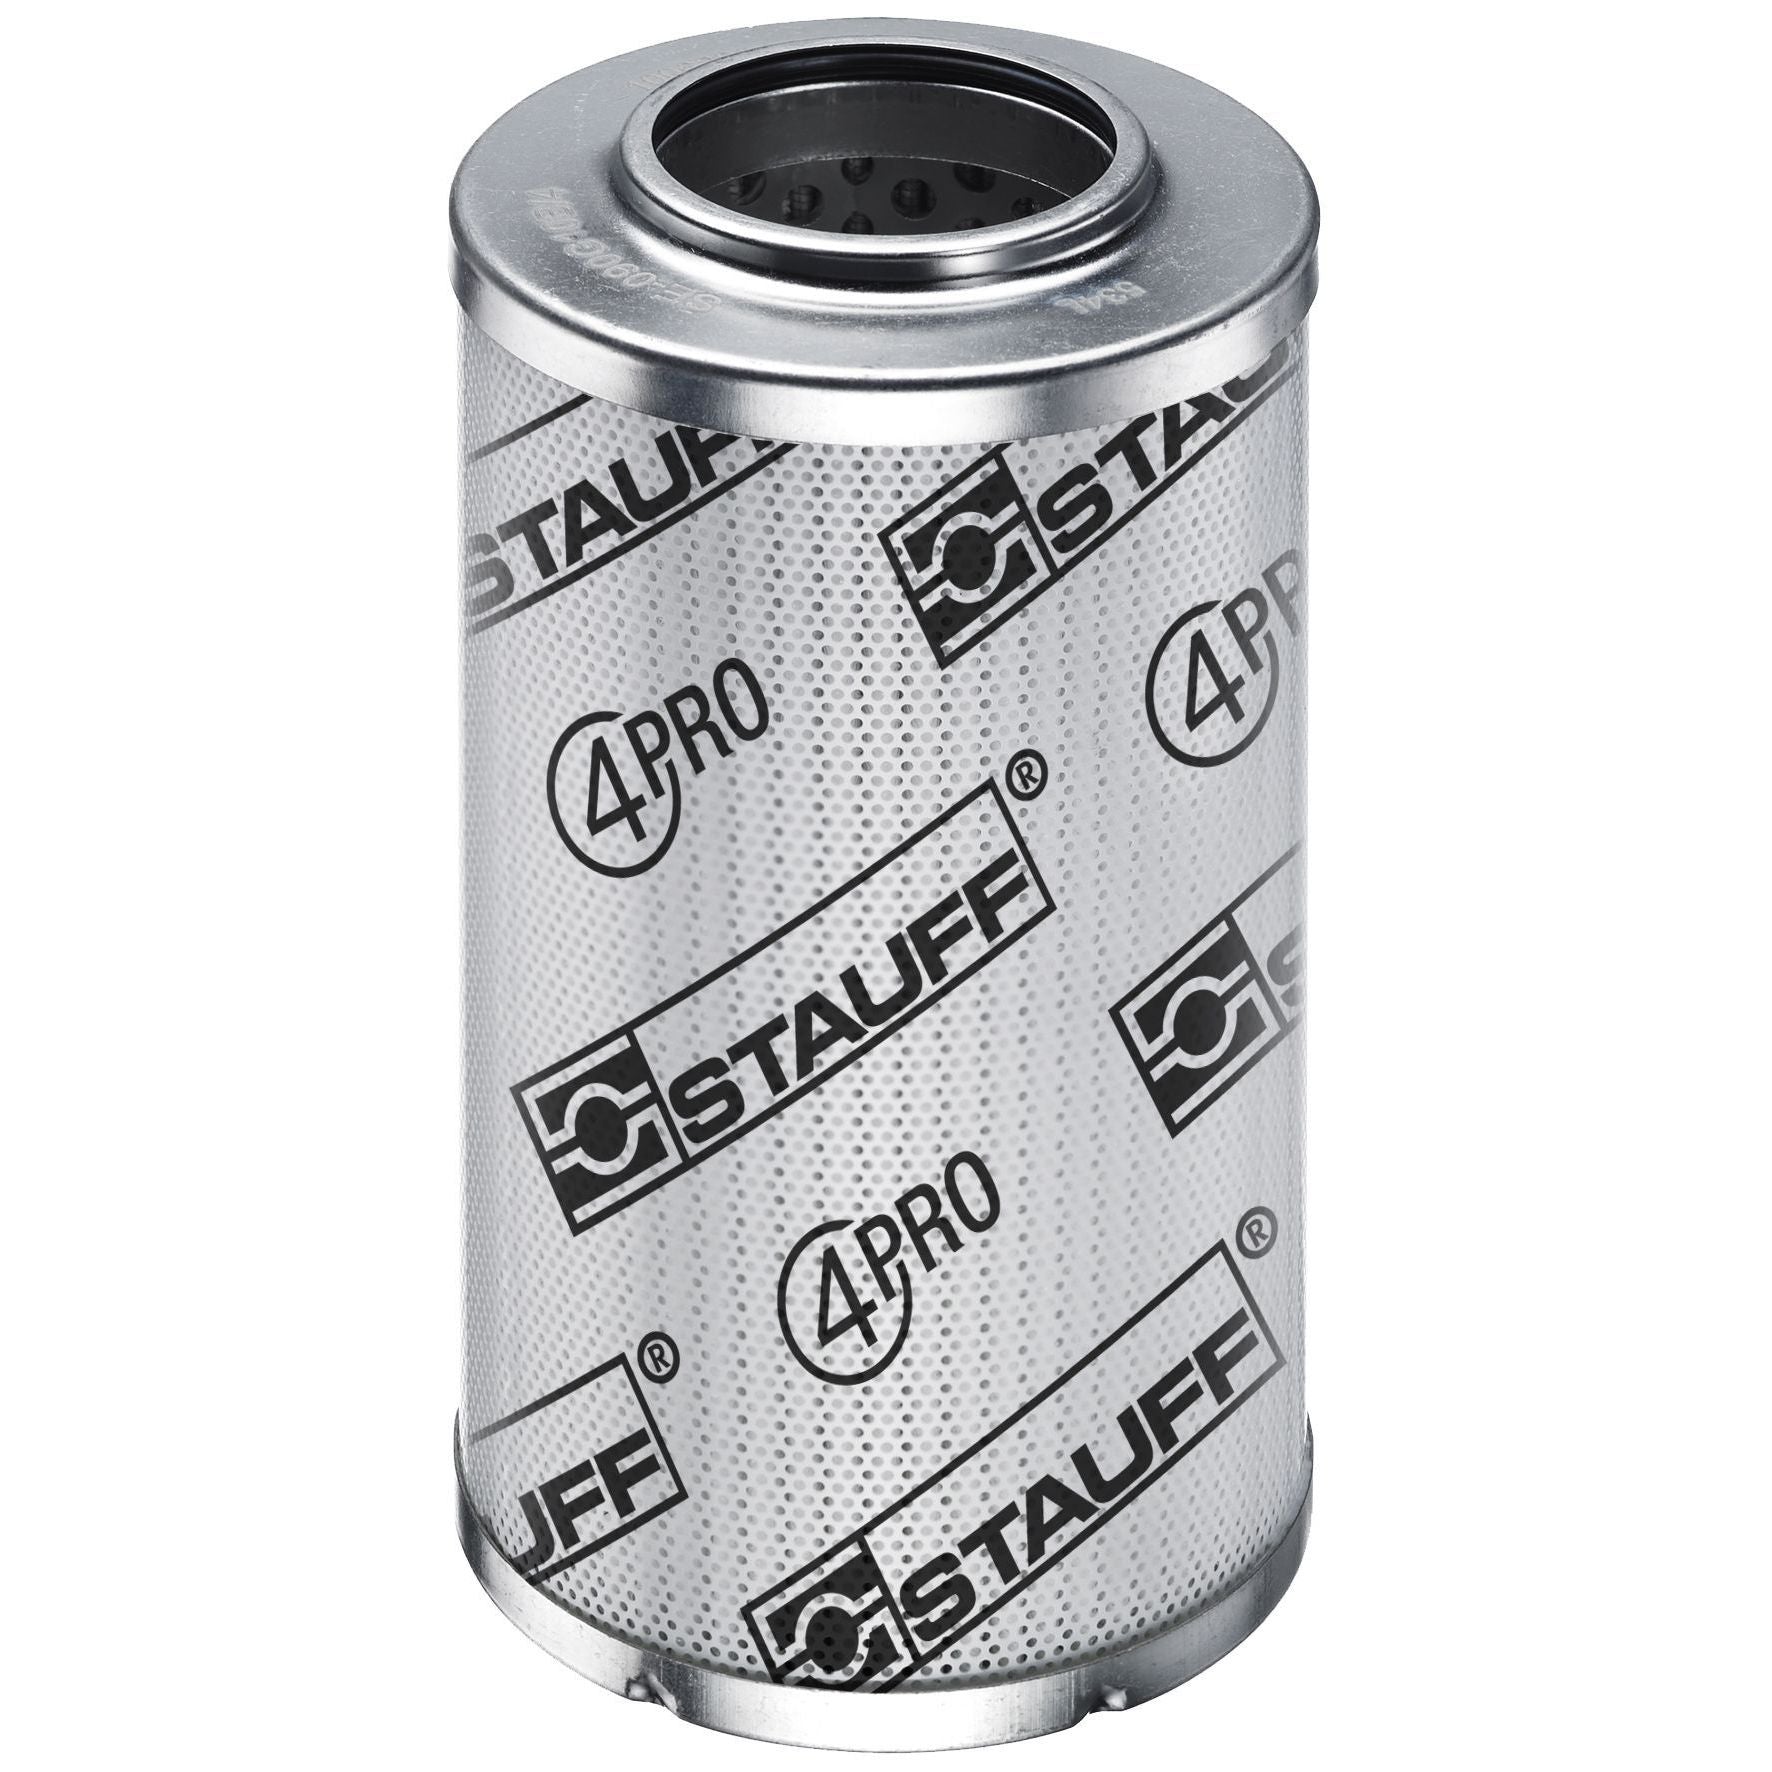 SE-160-H-05-B/4 : Stauff SF-160 Series Filter Element, 5 Micron, Synthetic, 3045psi Collapse Differential, Buna